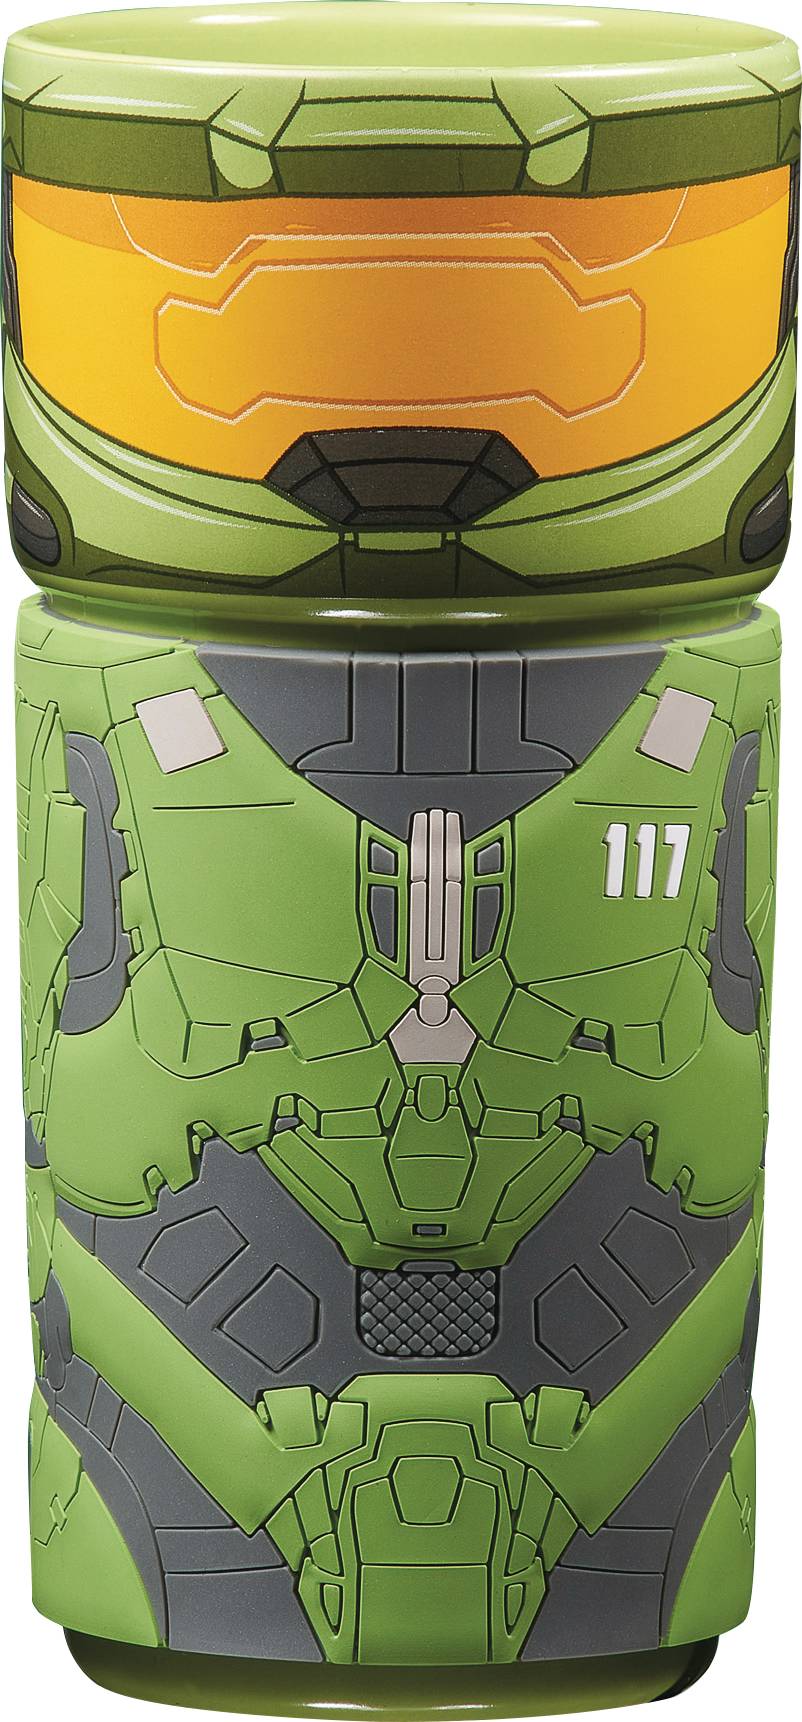 HALO MASTER CHIEF COSCUP